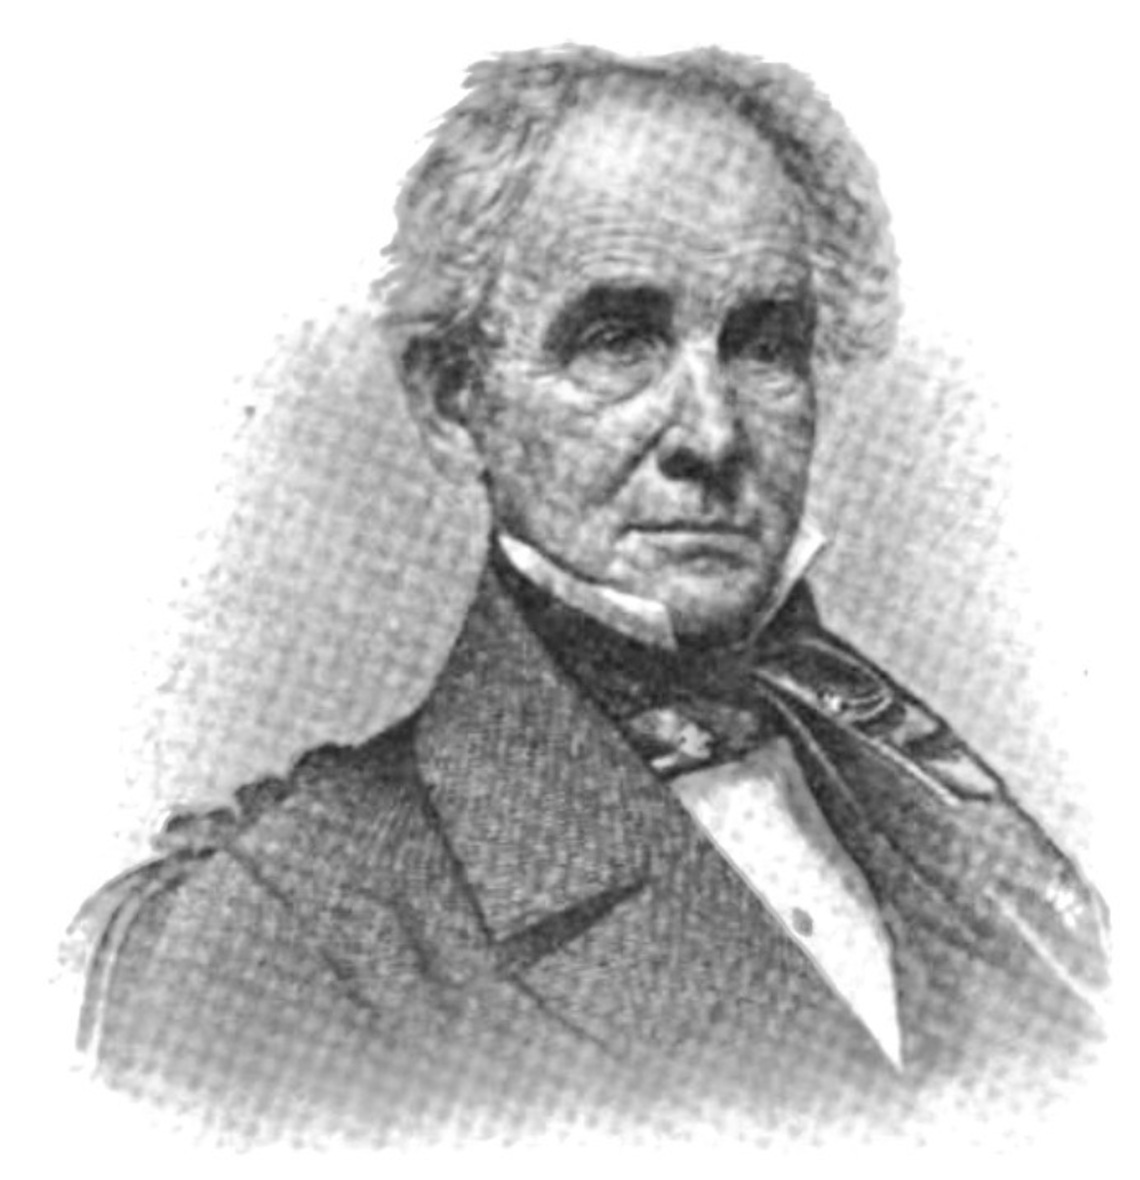 Zachariah Eddy, Burleigh's law teacher. His house and office are still honored locations in Middleborough, Massachusetts. 